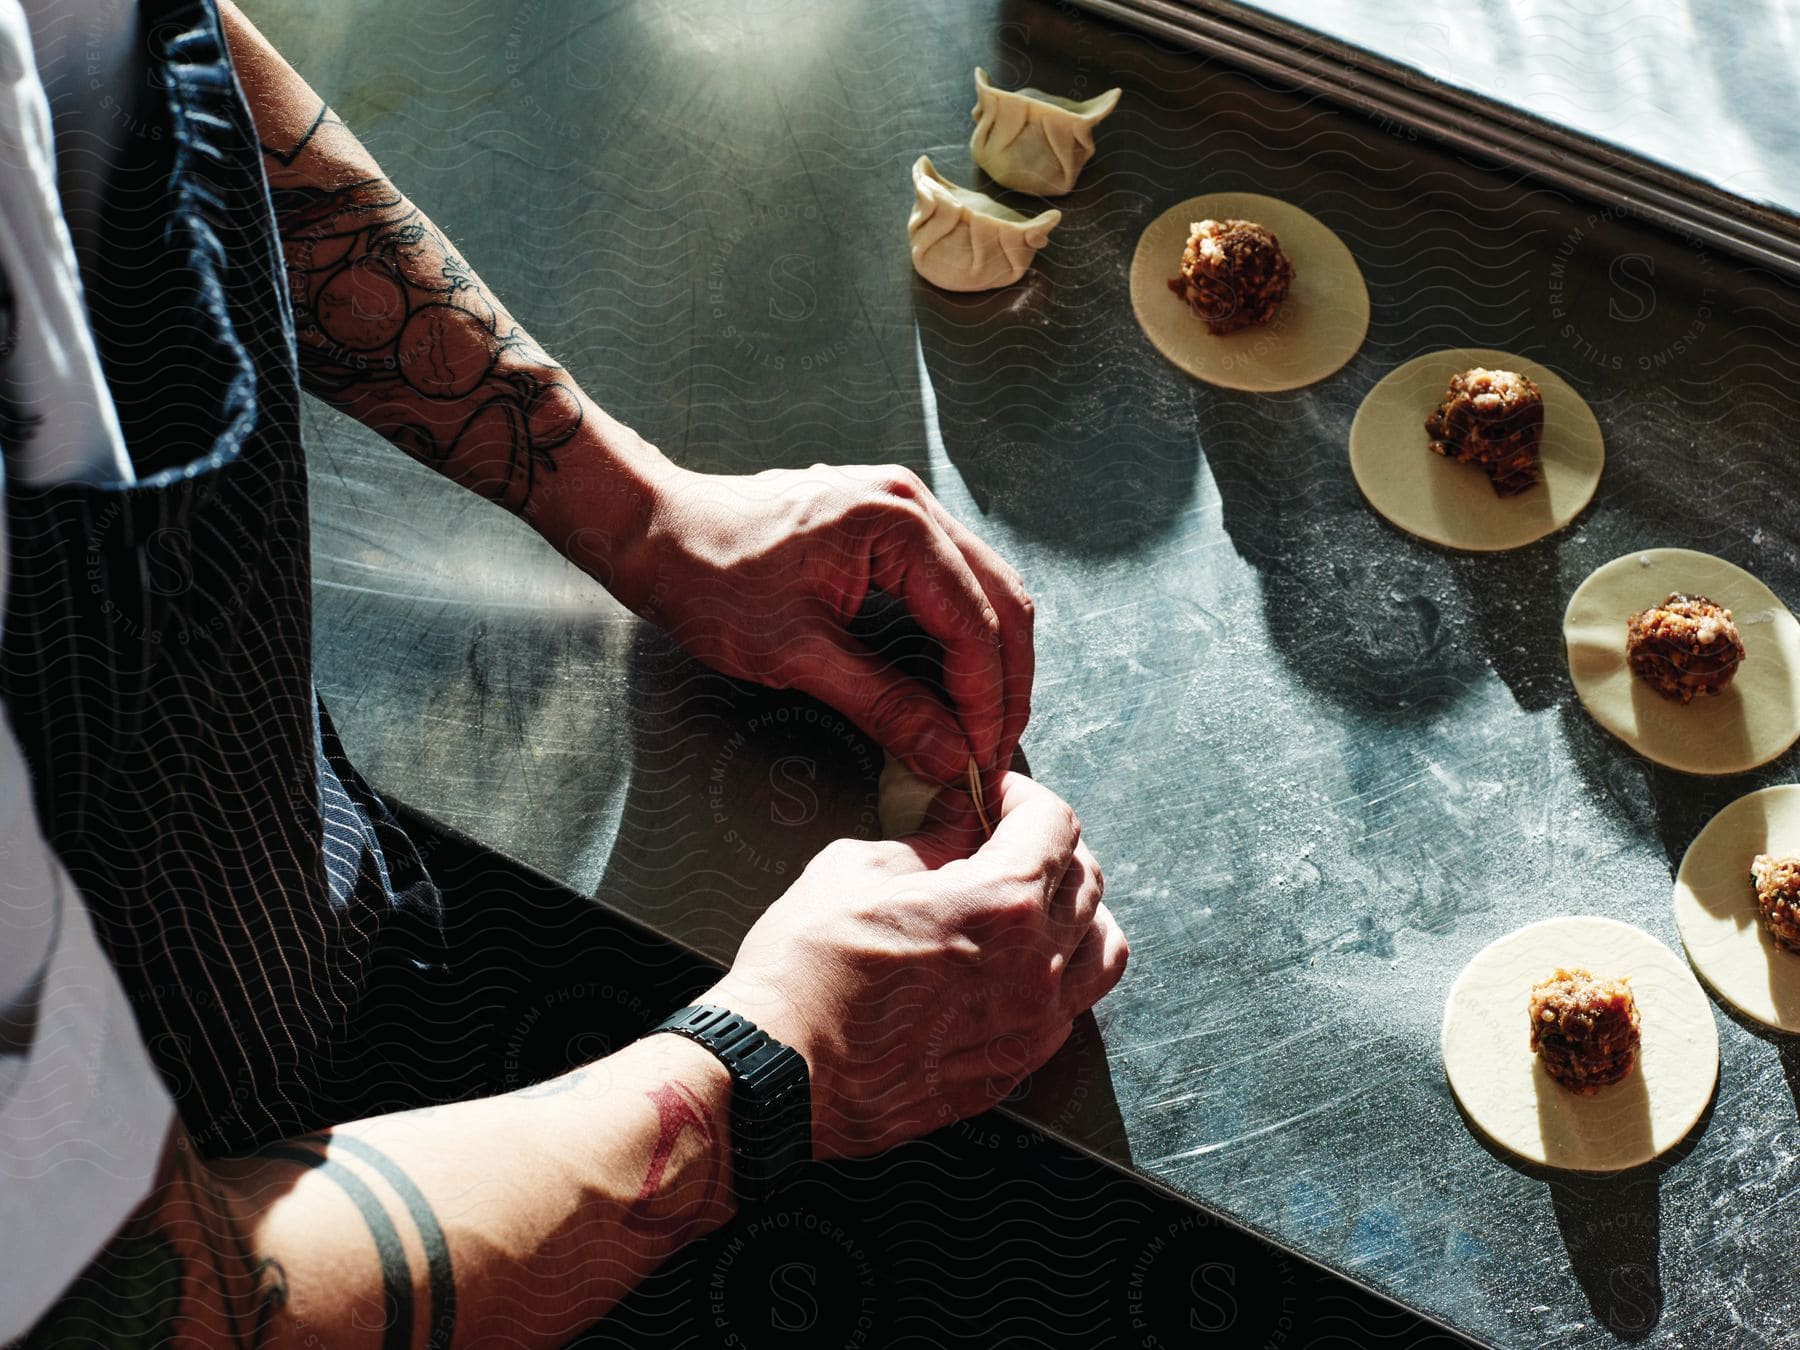 A chef prepares dumplings using pastry and meat